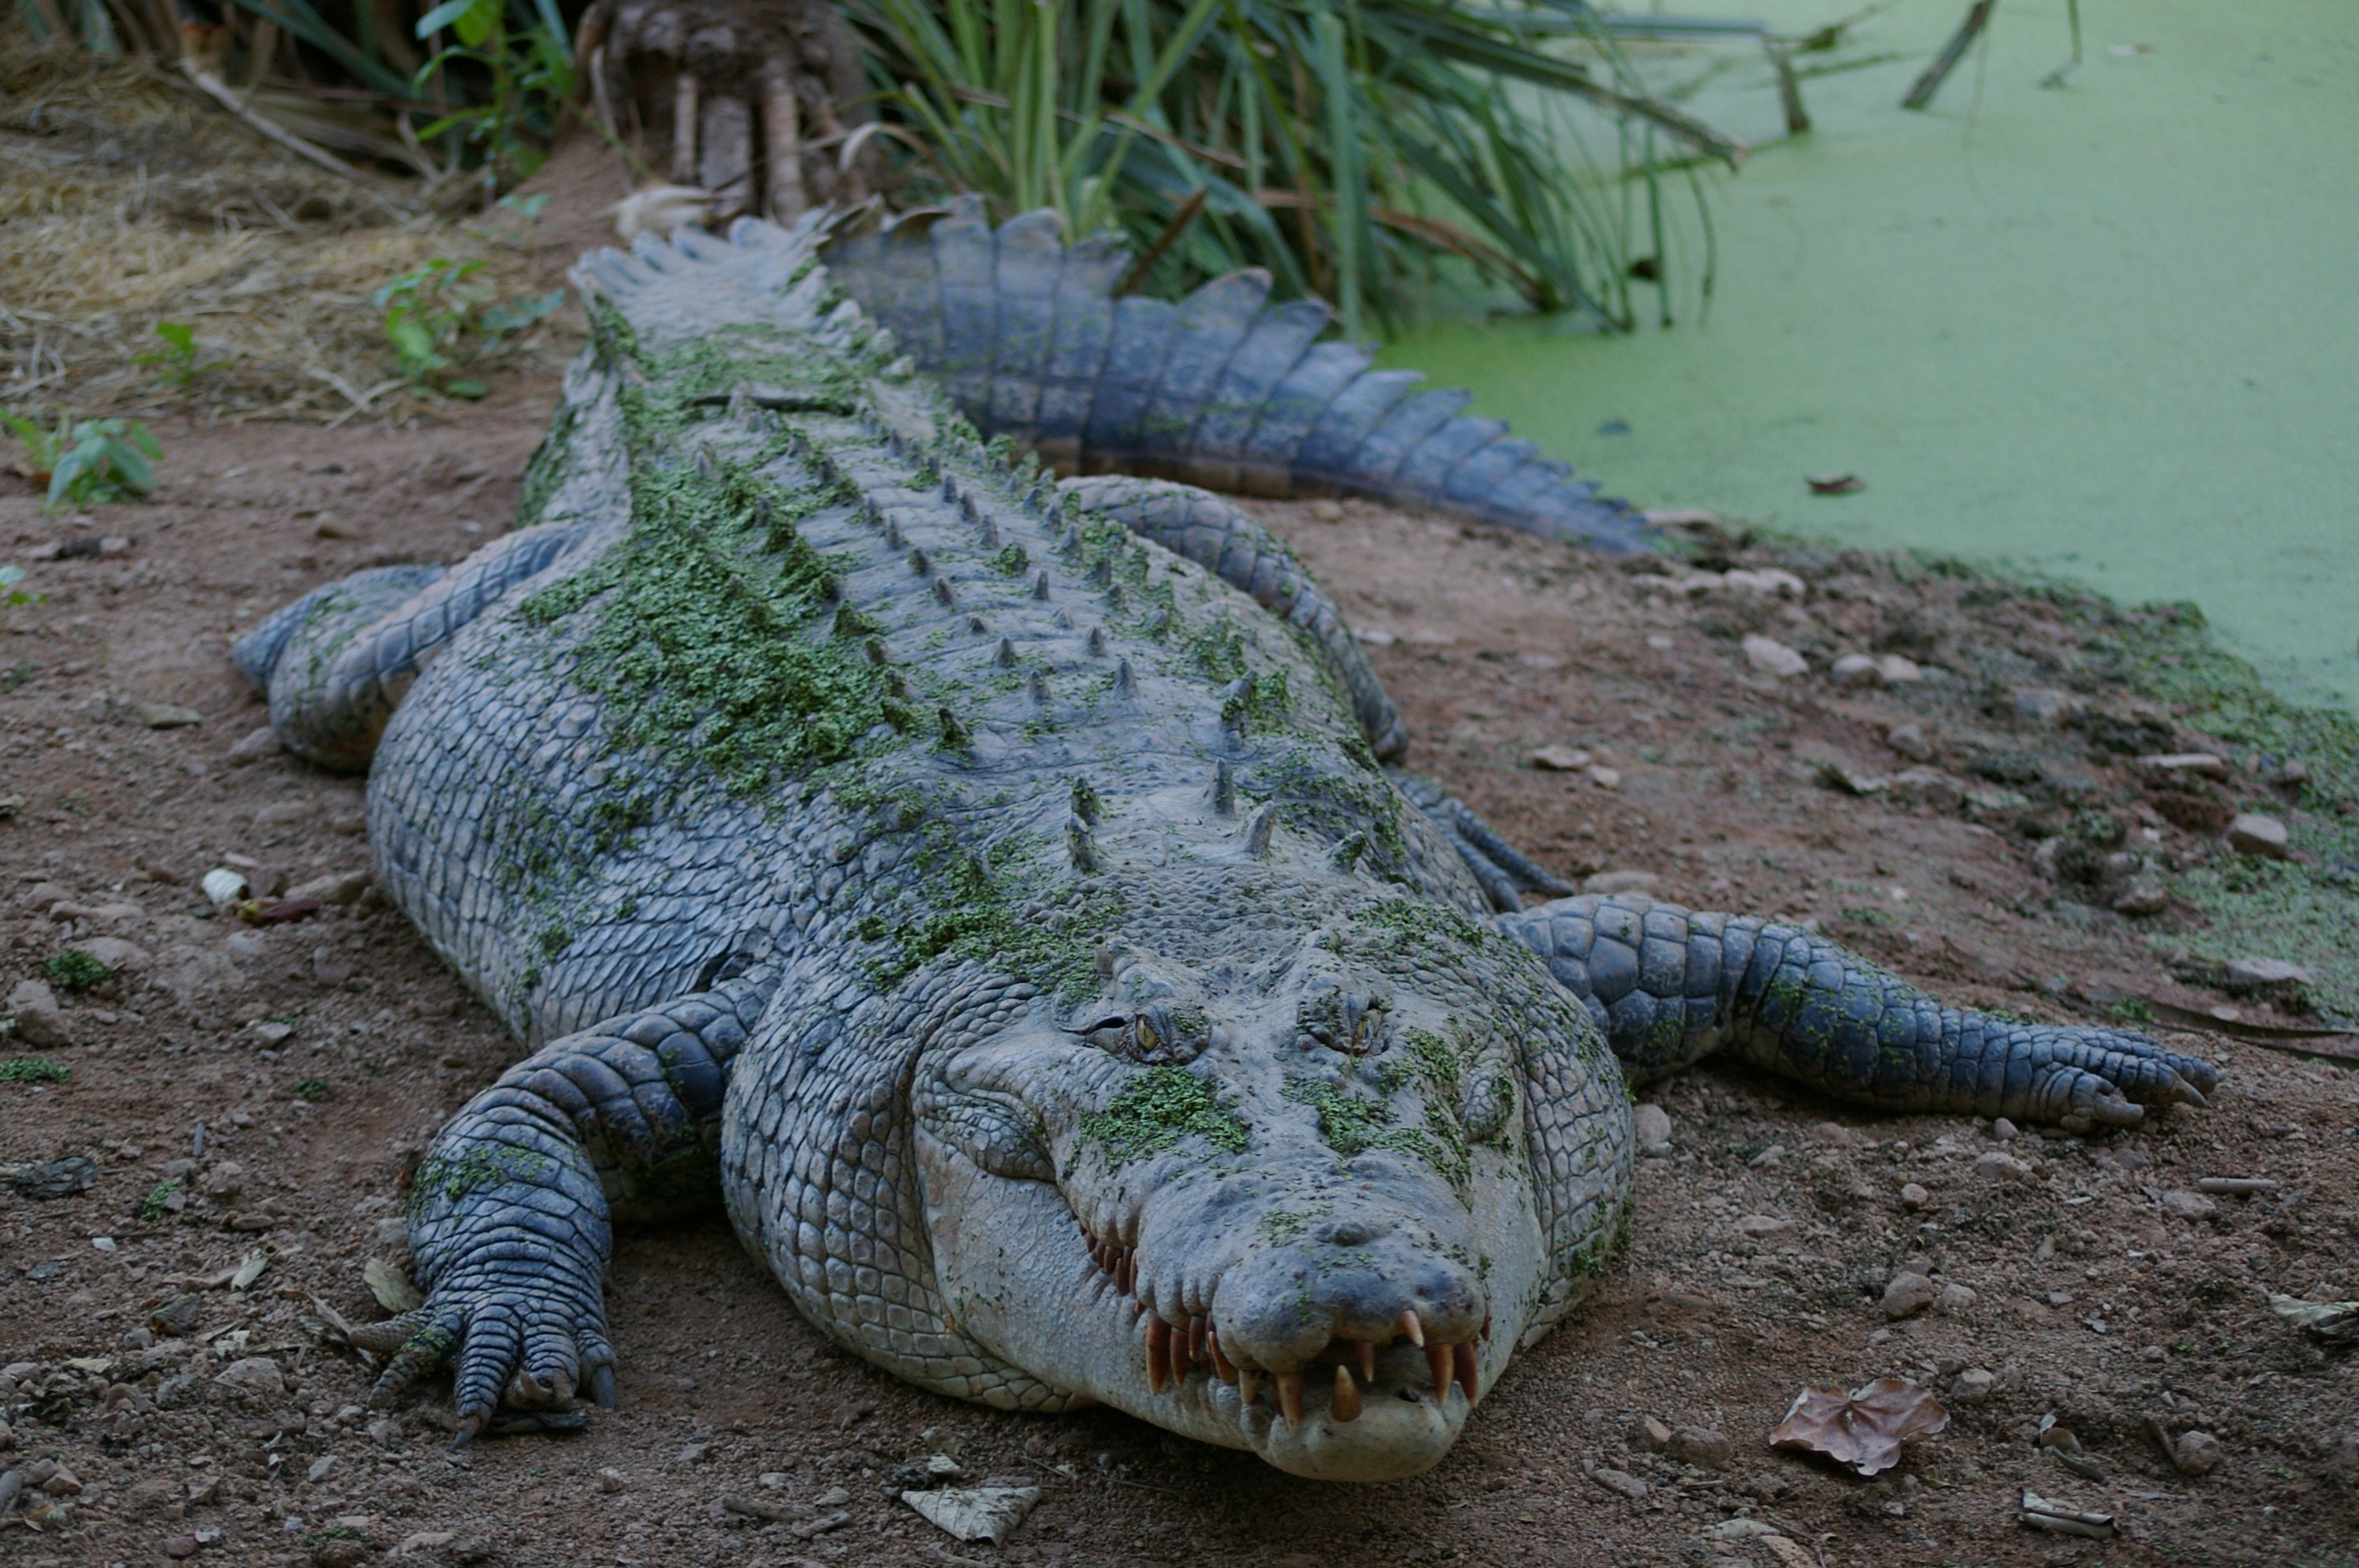 A big and scary crocodile is lying on the bank of the river